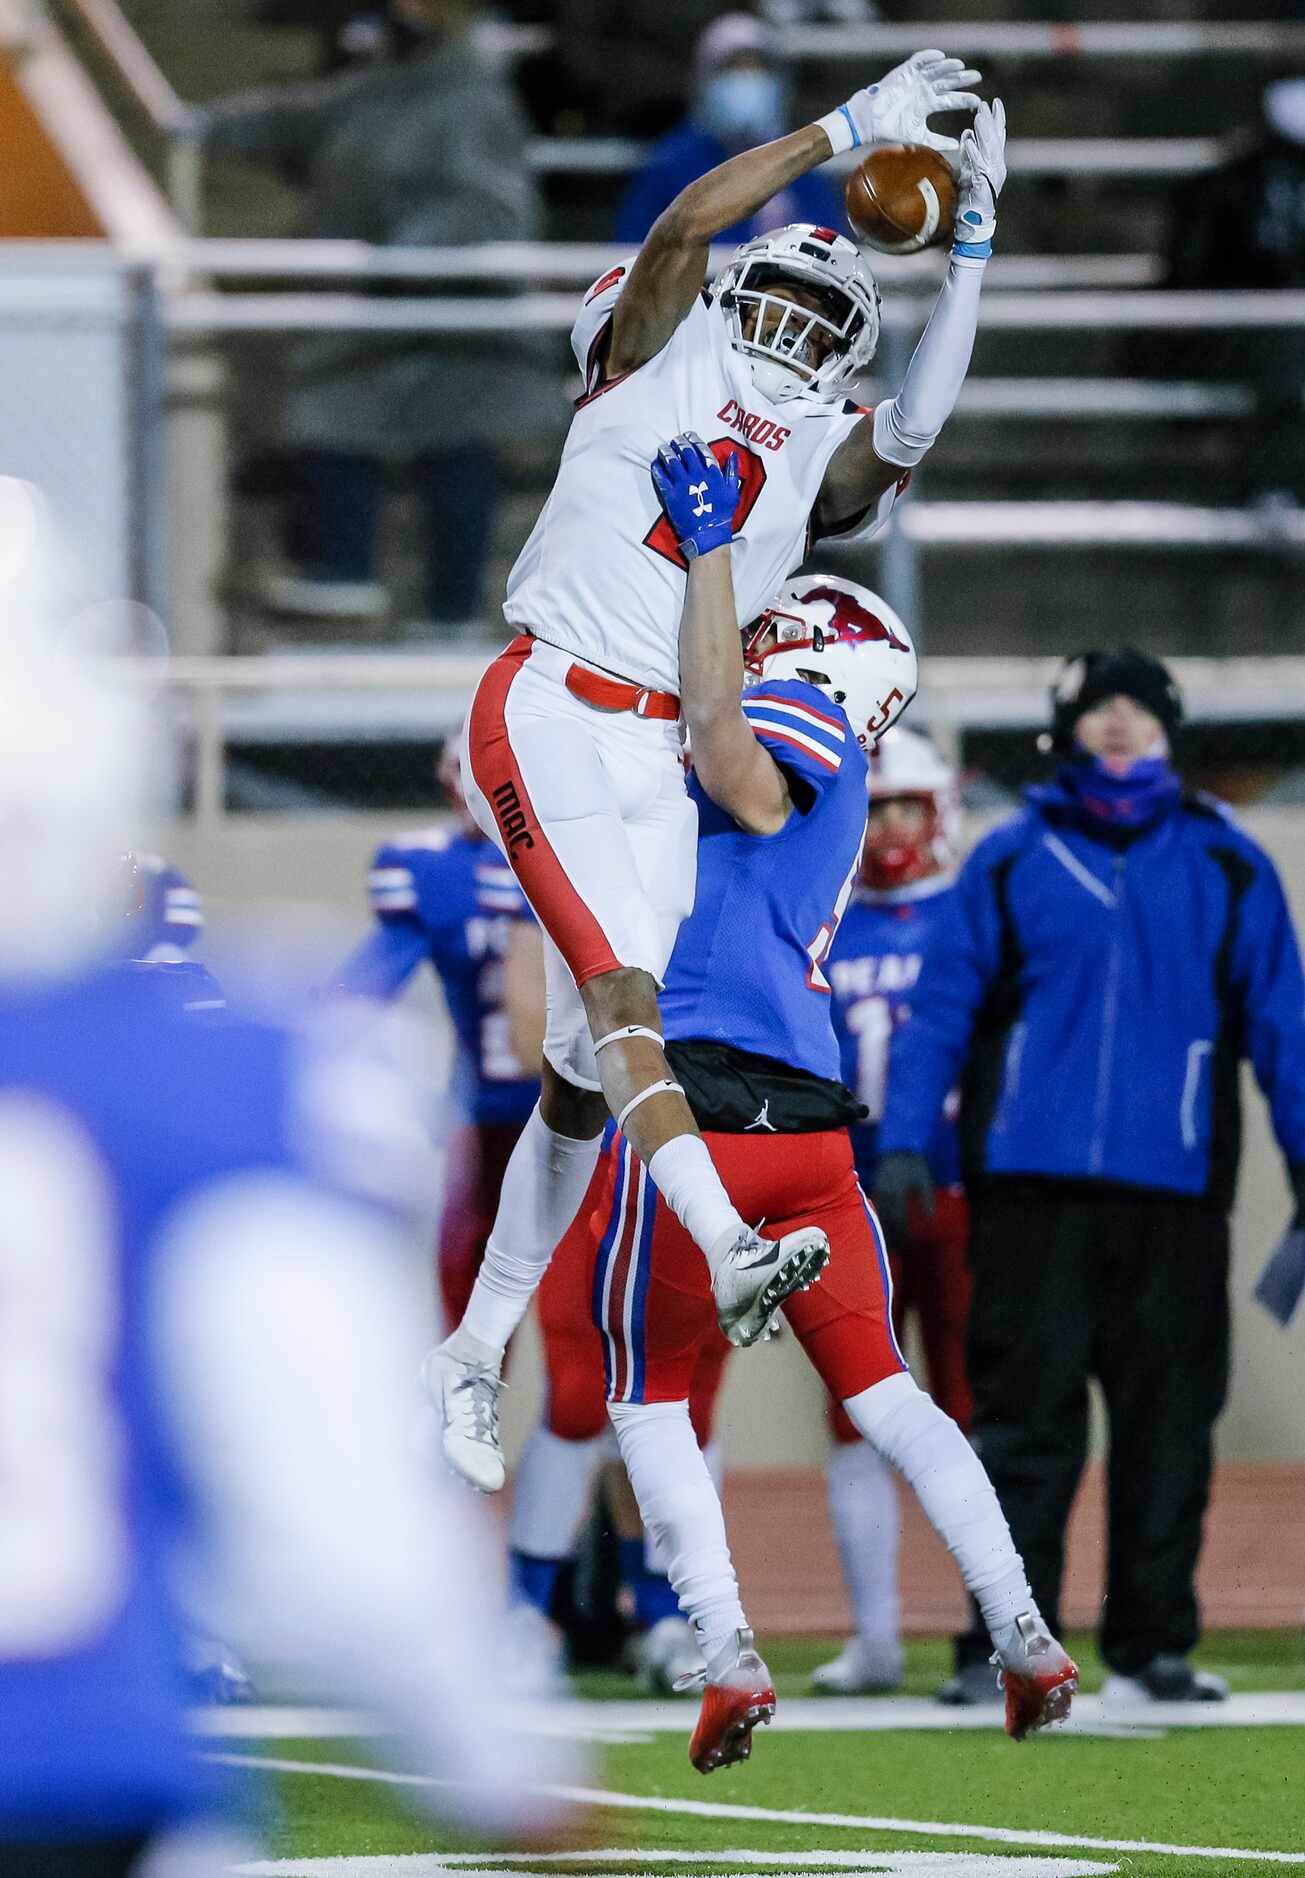 Irving MacArthur senior Lee Hamilton (2) is unable to catch a pass as JJ Pearce Demond White...